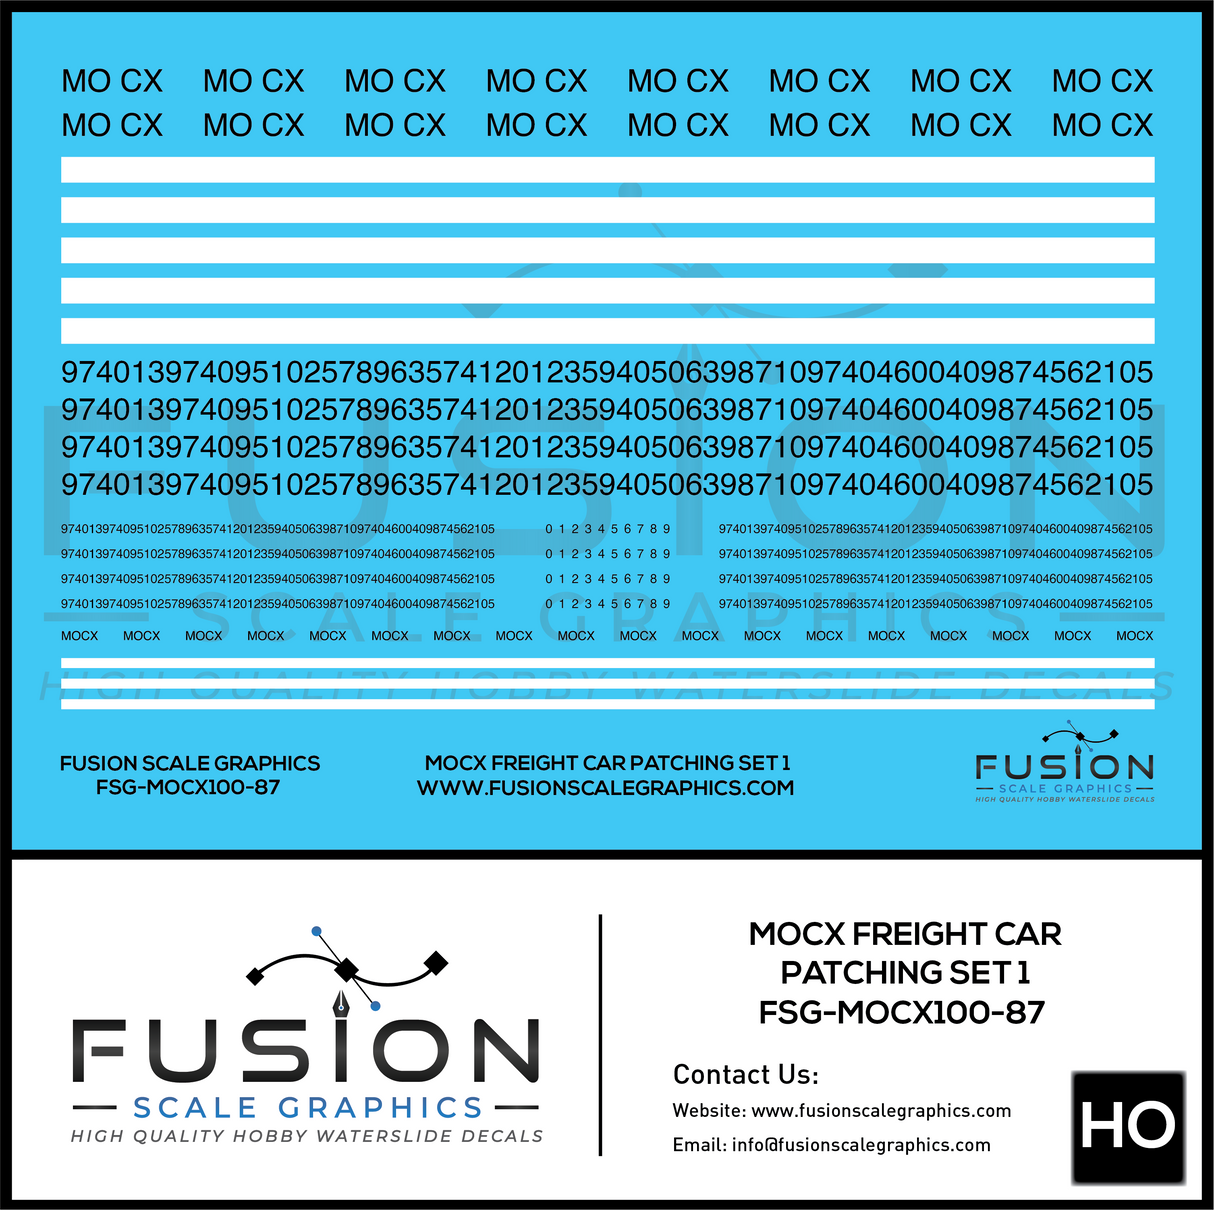 HO Scale MOCX Covered Hoppers Patching Decal Set 1